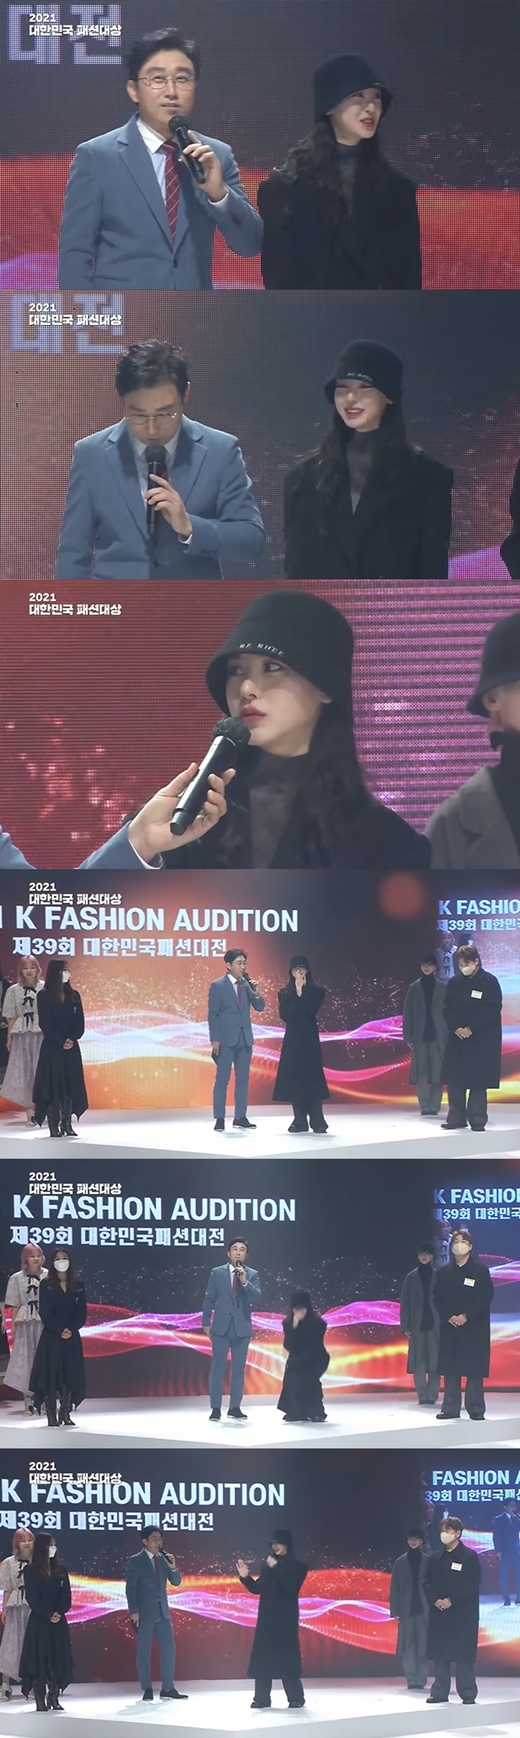 KBS announcer Kim Hyun-wook, 49, has been hit by comments online.This is because criticism is being poured that Kim Hyun-wook, who was the host of the 2021 South Korea Fashion Awards, made rude remarks to Dancer no:ze (real name Noh Ji-hye and 25).At the time, no:ze appeared as Model in the Awards and showed runway Woking, which has been pointed out as an inappropriate process, with Kim Hyun-wook pointing out no:zes costumes and Woking and demanding dancing.Kim Hyun-wook said to the audience when the Models Woking was over at the time, Did you notice that there was a famous person?I actually paid for it and called him, but he did not work, and he put Hat on it again, he said.Kim Hyun-wook repeatedly said, I do not know why I put Hat on it, he said. I wish that person would have danced once.Kim Hyun-wook, who then conducted an interview with no:ze on the spot, reiterated, Why did you write Hat?, and when no:ze said, I wrote Hat to be cool, Kim Hyun-wook said, But when I wrote Hat and came out, I had to come out nicely, and I came out like this (I pretend to bow my head), and I came out as the first runner, but no one knew.No:ze comes out ... Whos no:ze? I saw it with my eyes open, he said.No:ze, who was nervous because he had no runway Woking experience, said, I danced a lot, but it was so nervous that I saw the ground because it was a different show.Kim Hyun-wook said, Did you practice walking?I asked, no:ze said, No. I thought it would be artificial if I practiced it, so I wanted to do what I wanted to do.Kim Hyun-wook then asked no:ze to try to walk again when no:ze showed Woking and said, This is different from Model, walking.Its like Im walking, he even compared.In particular, Kim Hyun-wook suddenly told no:ze, Can you show me the dance for a while, because thats my major.In celebration, no:ze was finally demanding a dance, despite being embarrassed.There was criticism online.I did not know why I put Hat on it, I wish I had let him dance once, and so on. This is different from Model.Walking is similar to walking. The criticism continues to be that it is a rude way of proceeding that does not care about the other person, even when he or she points out that he or she is walking.Kim Hyun-wook, a former KBS 26th public bond announcer in 2000, left the company in 2011 and is working as a Broadcaster.